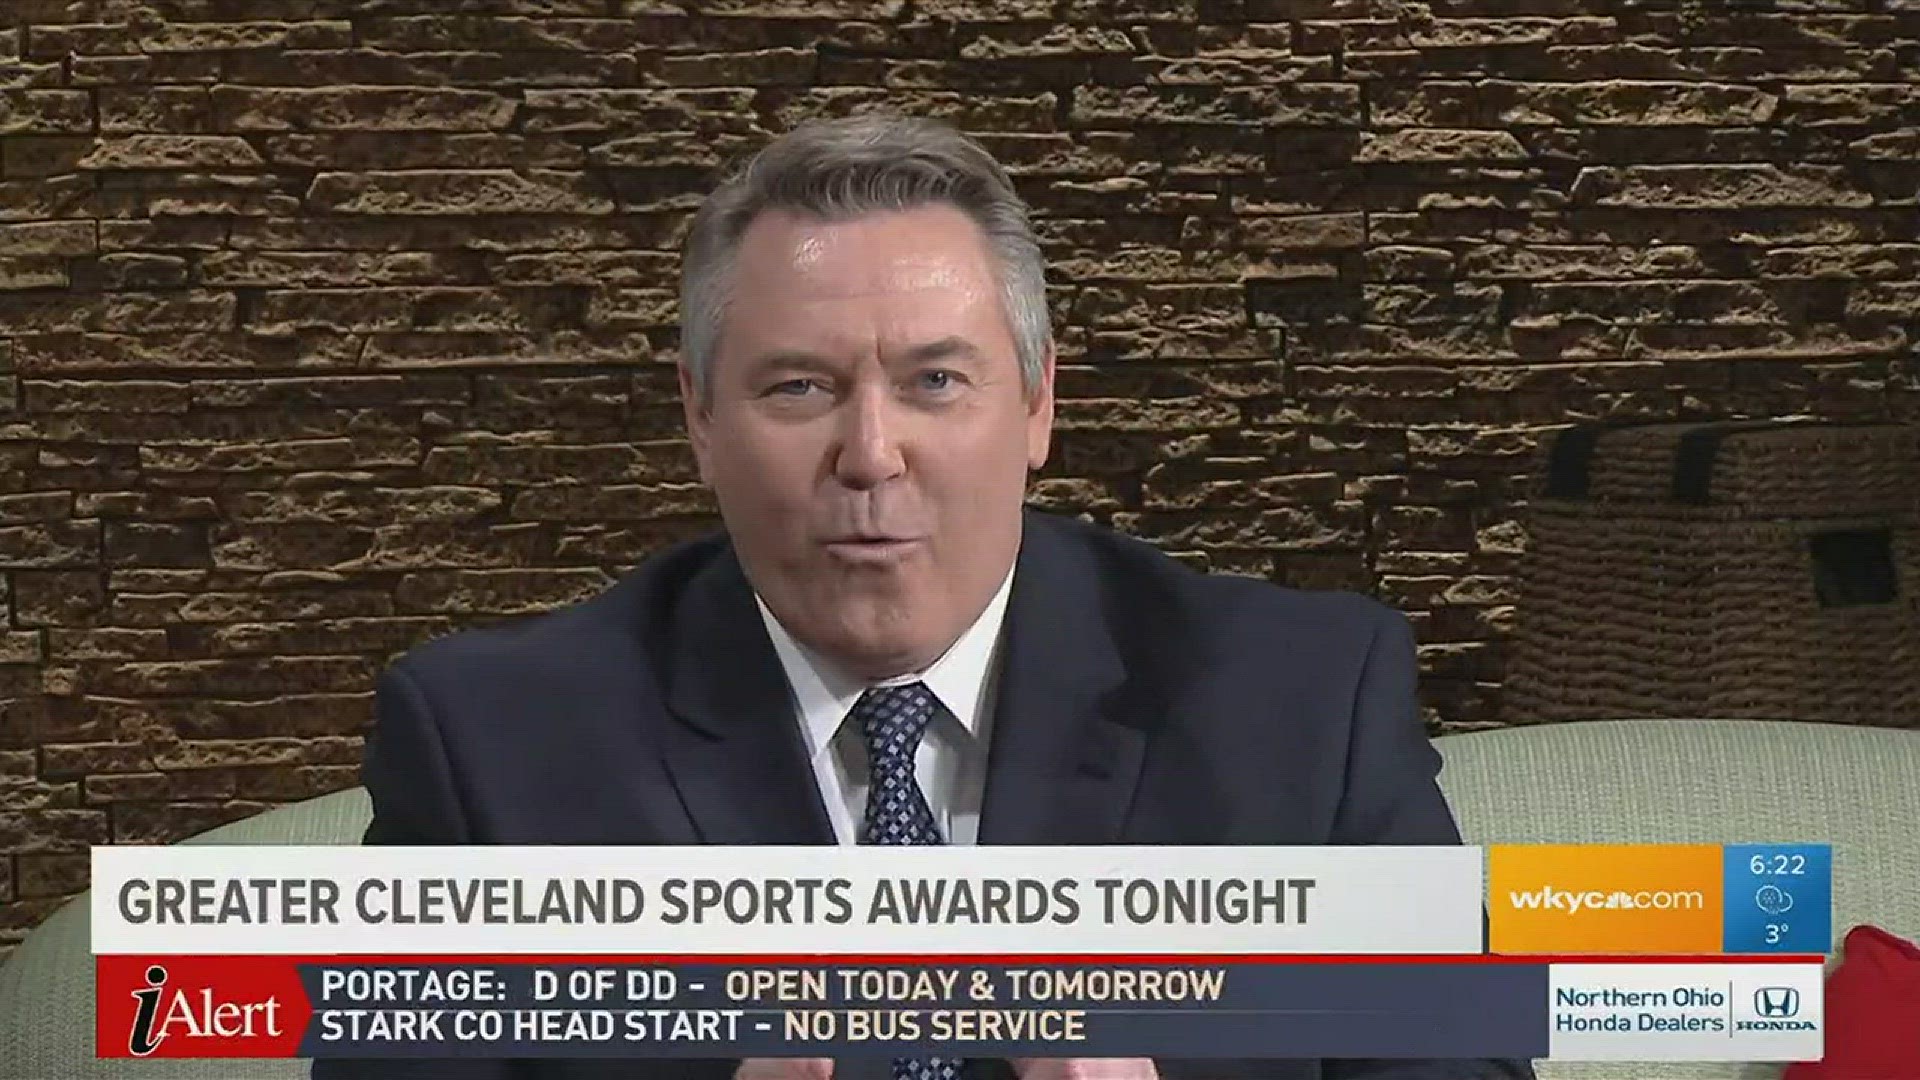 ESPN's Tom Rinaldi stopped by WKYC to talk sports with John Anderson prior to the Greater Cleveland Sports Awards.